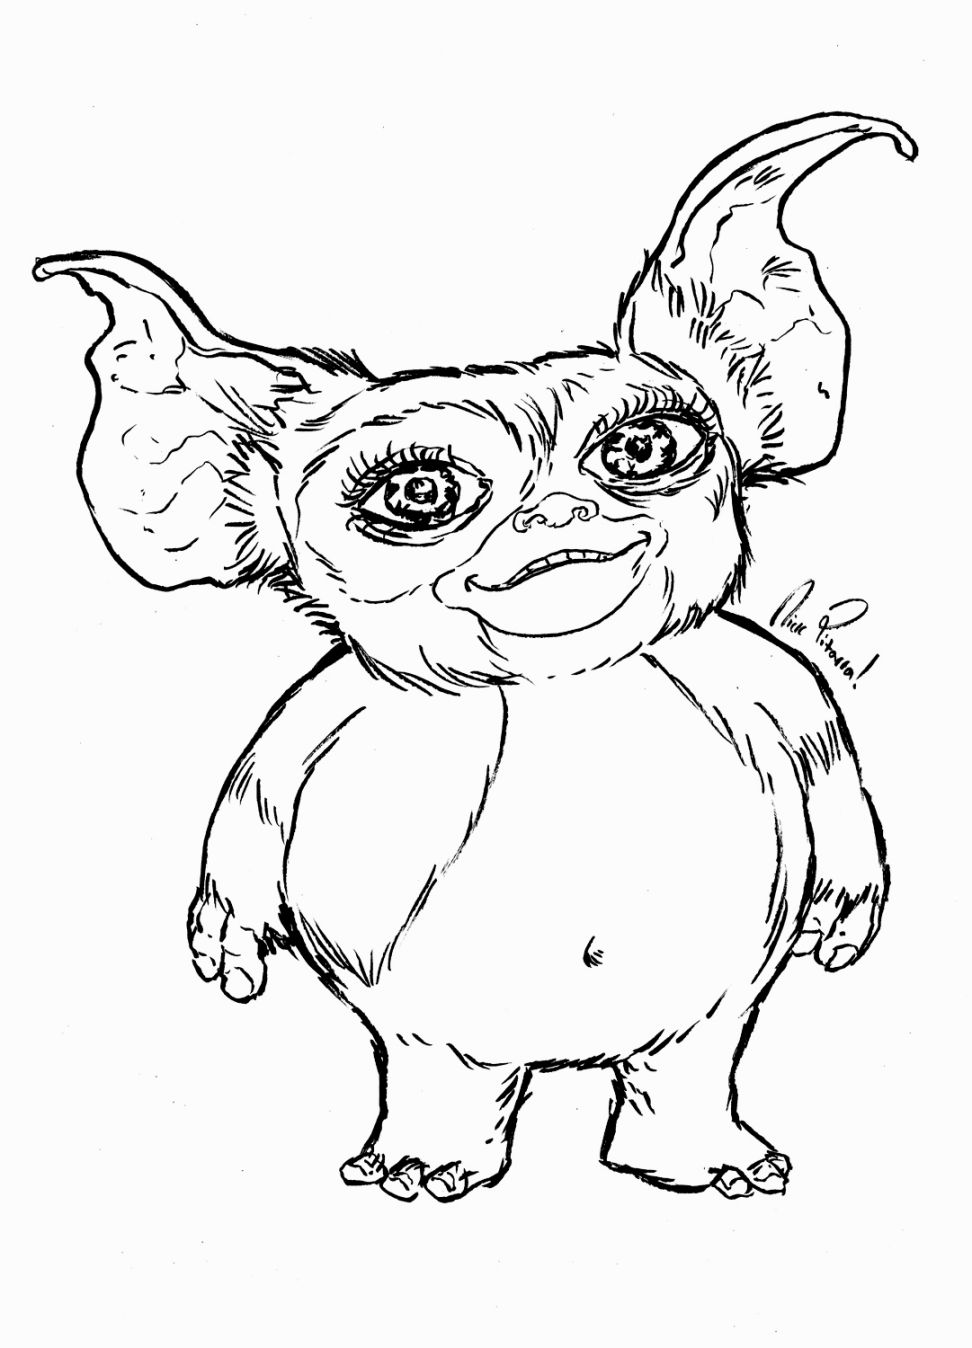 Gremlins Coloring Pages - Coloring Home